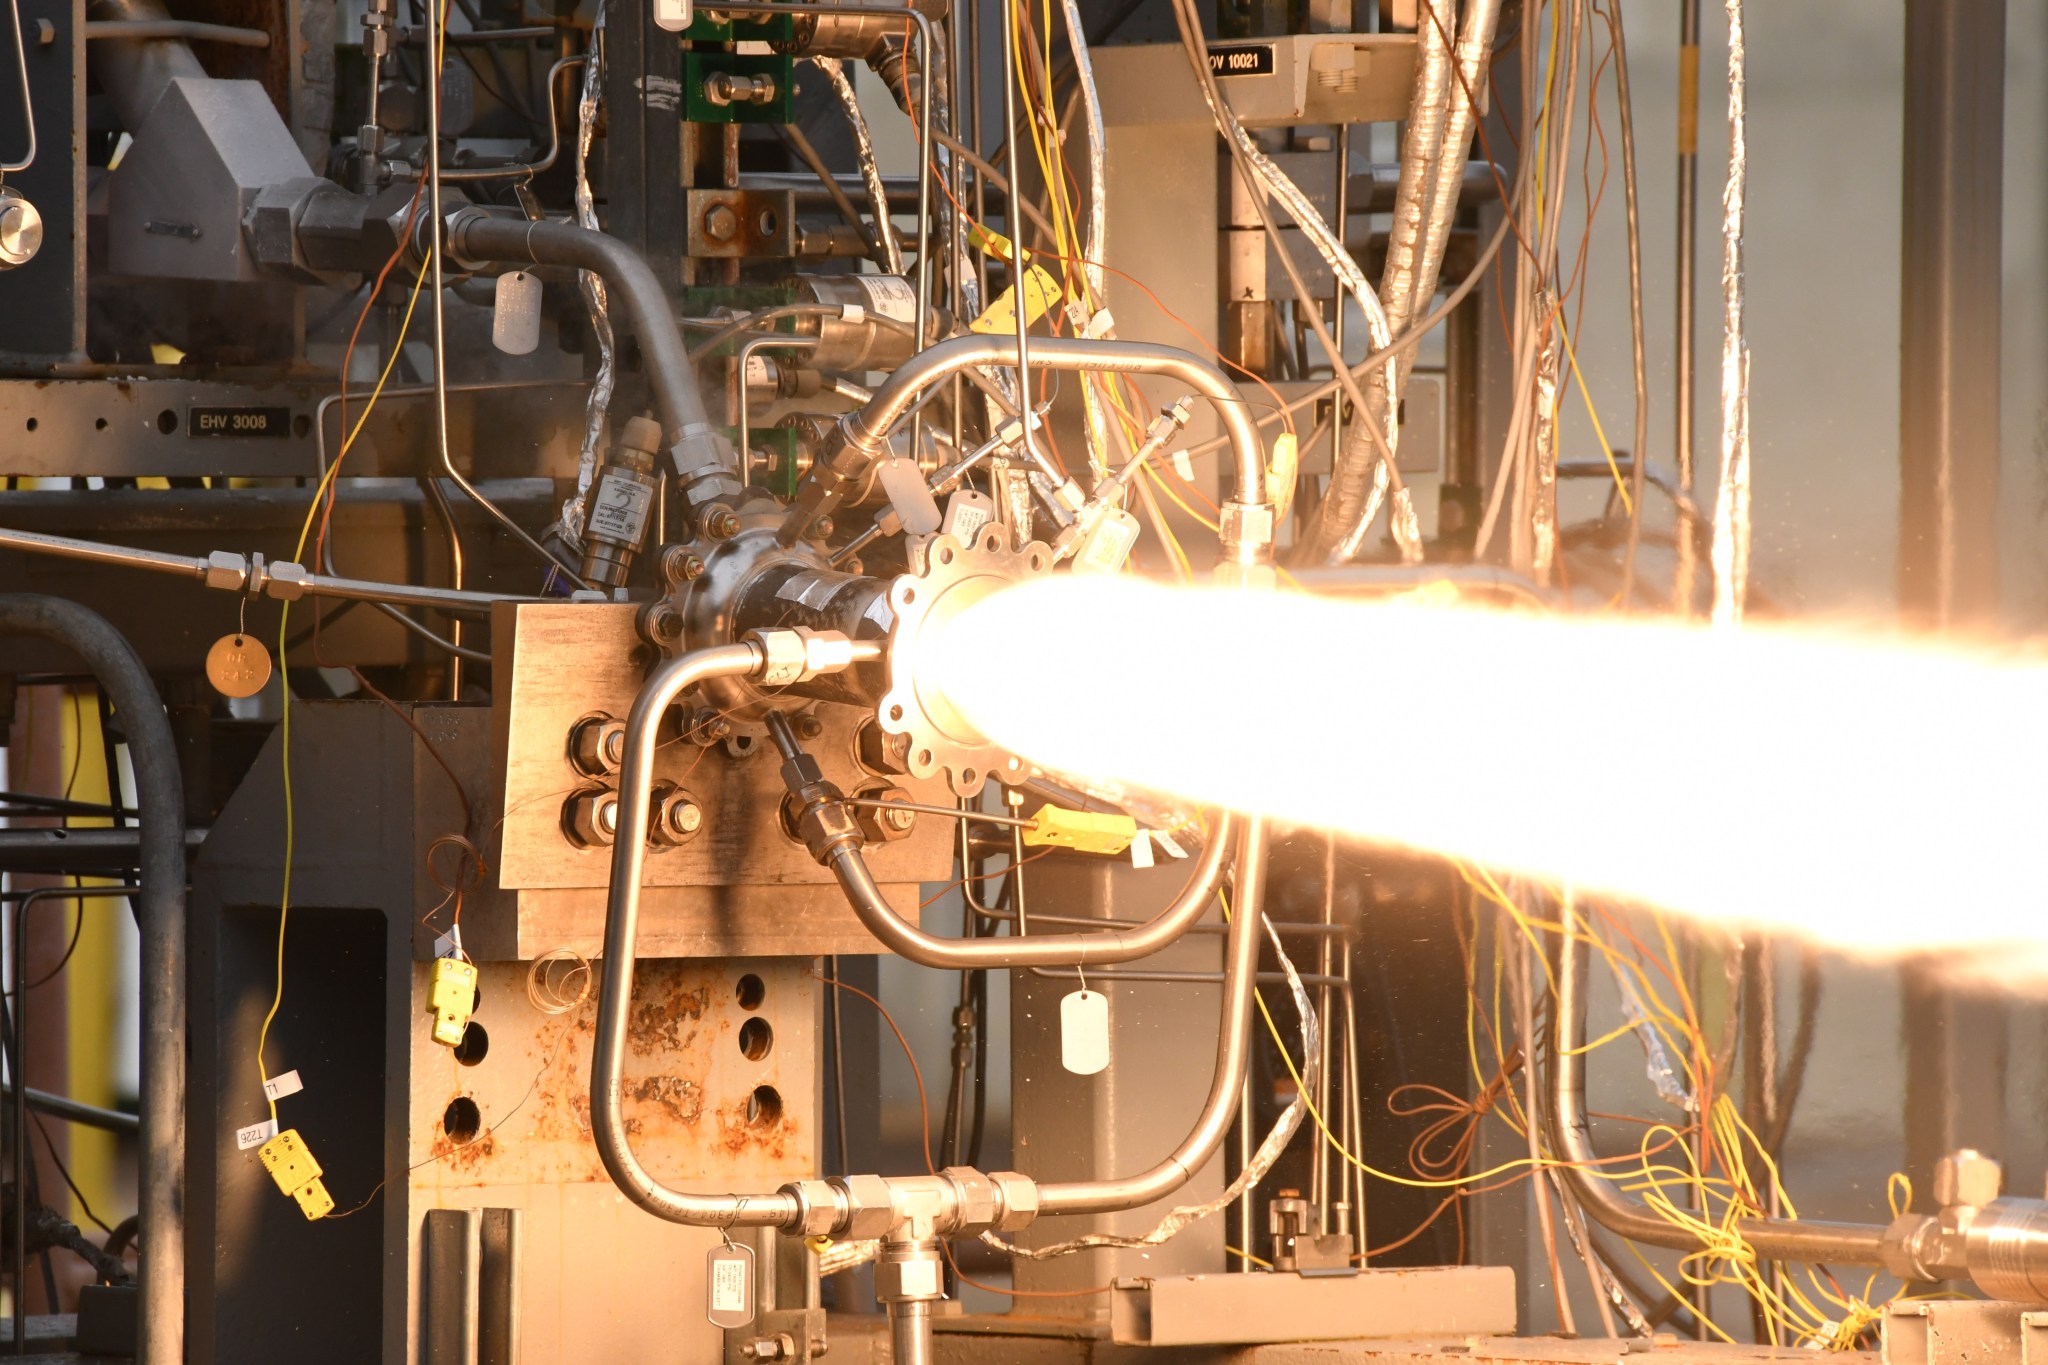 Engineers test-fire a 3D-printed rocket engine combustion chamber at NASA’s Marshall Space Flight Center in Huntsville, Alabama.